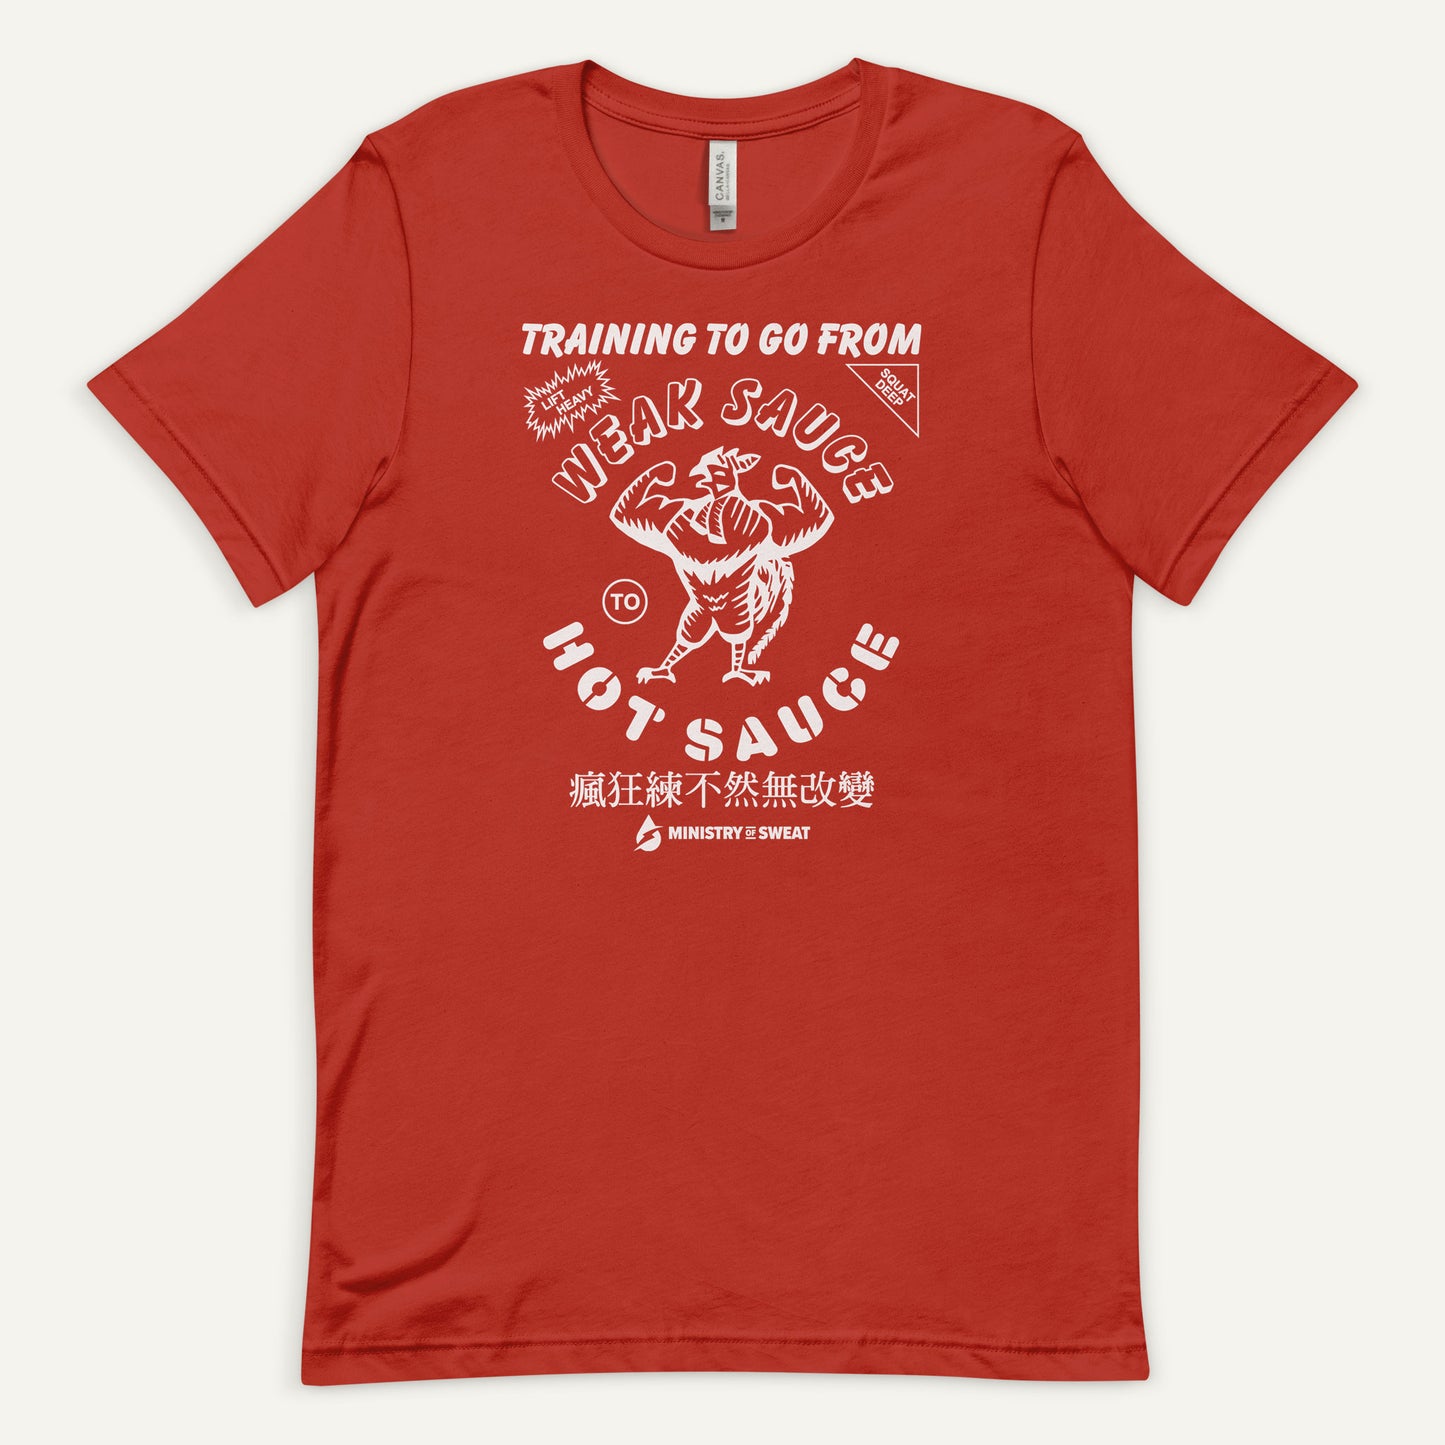 Training To Go From Weak Sauce To Hot Sauce Men's Standard T-Shirt